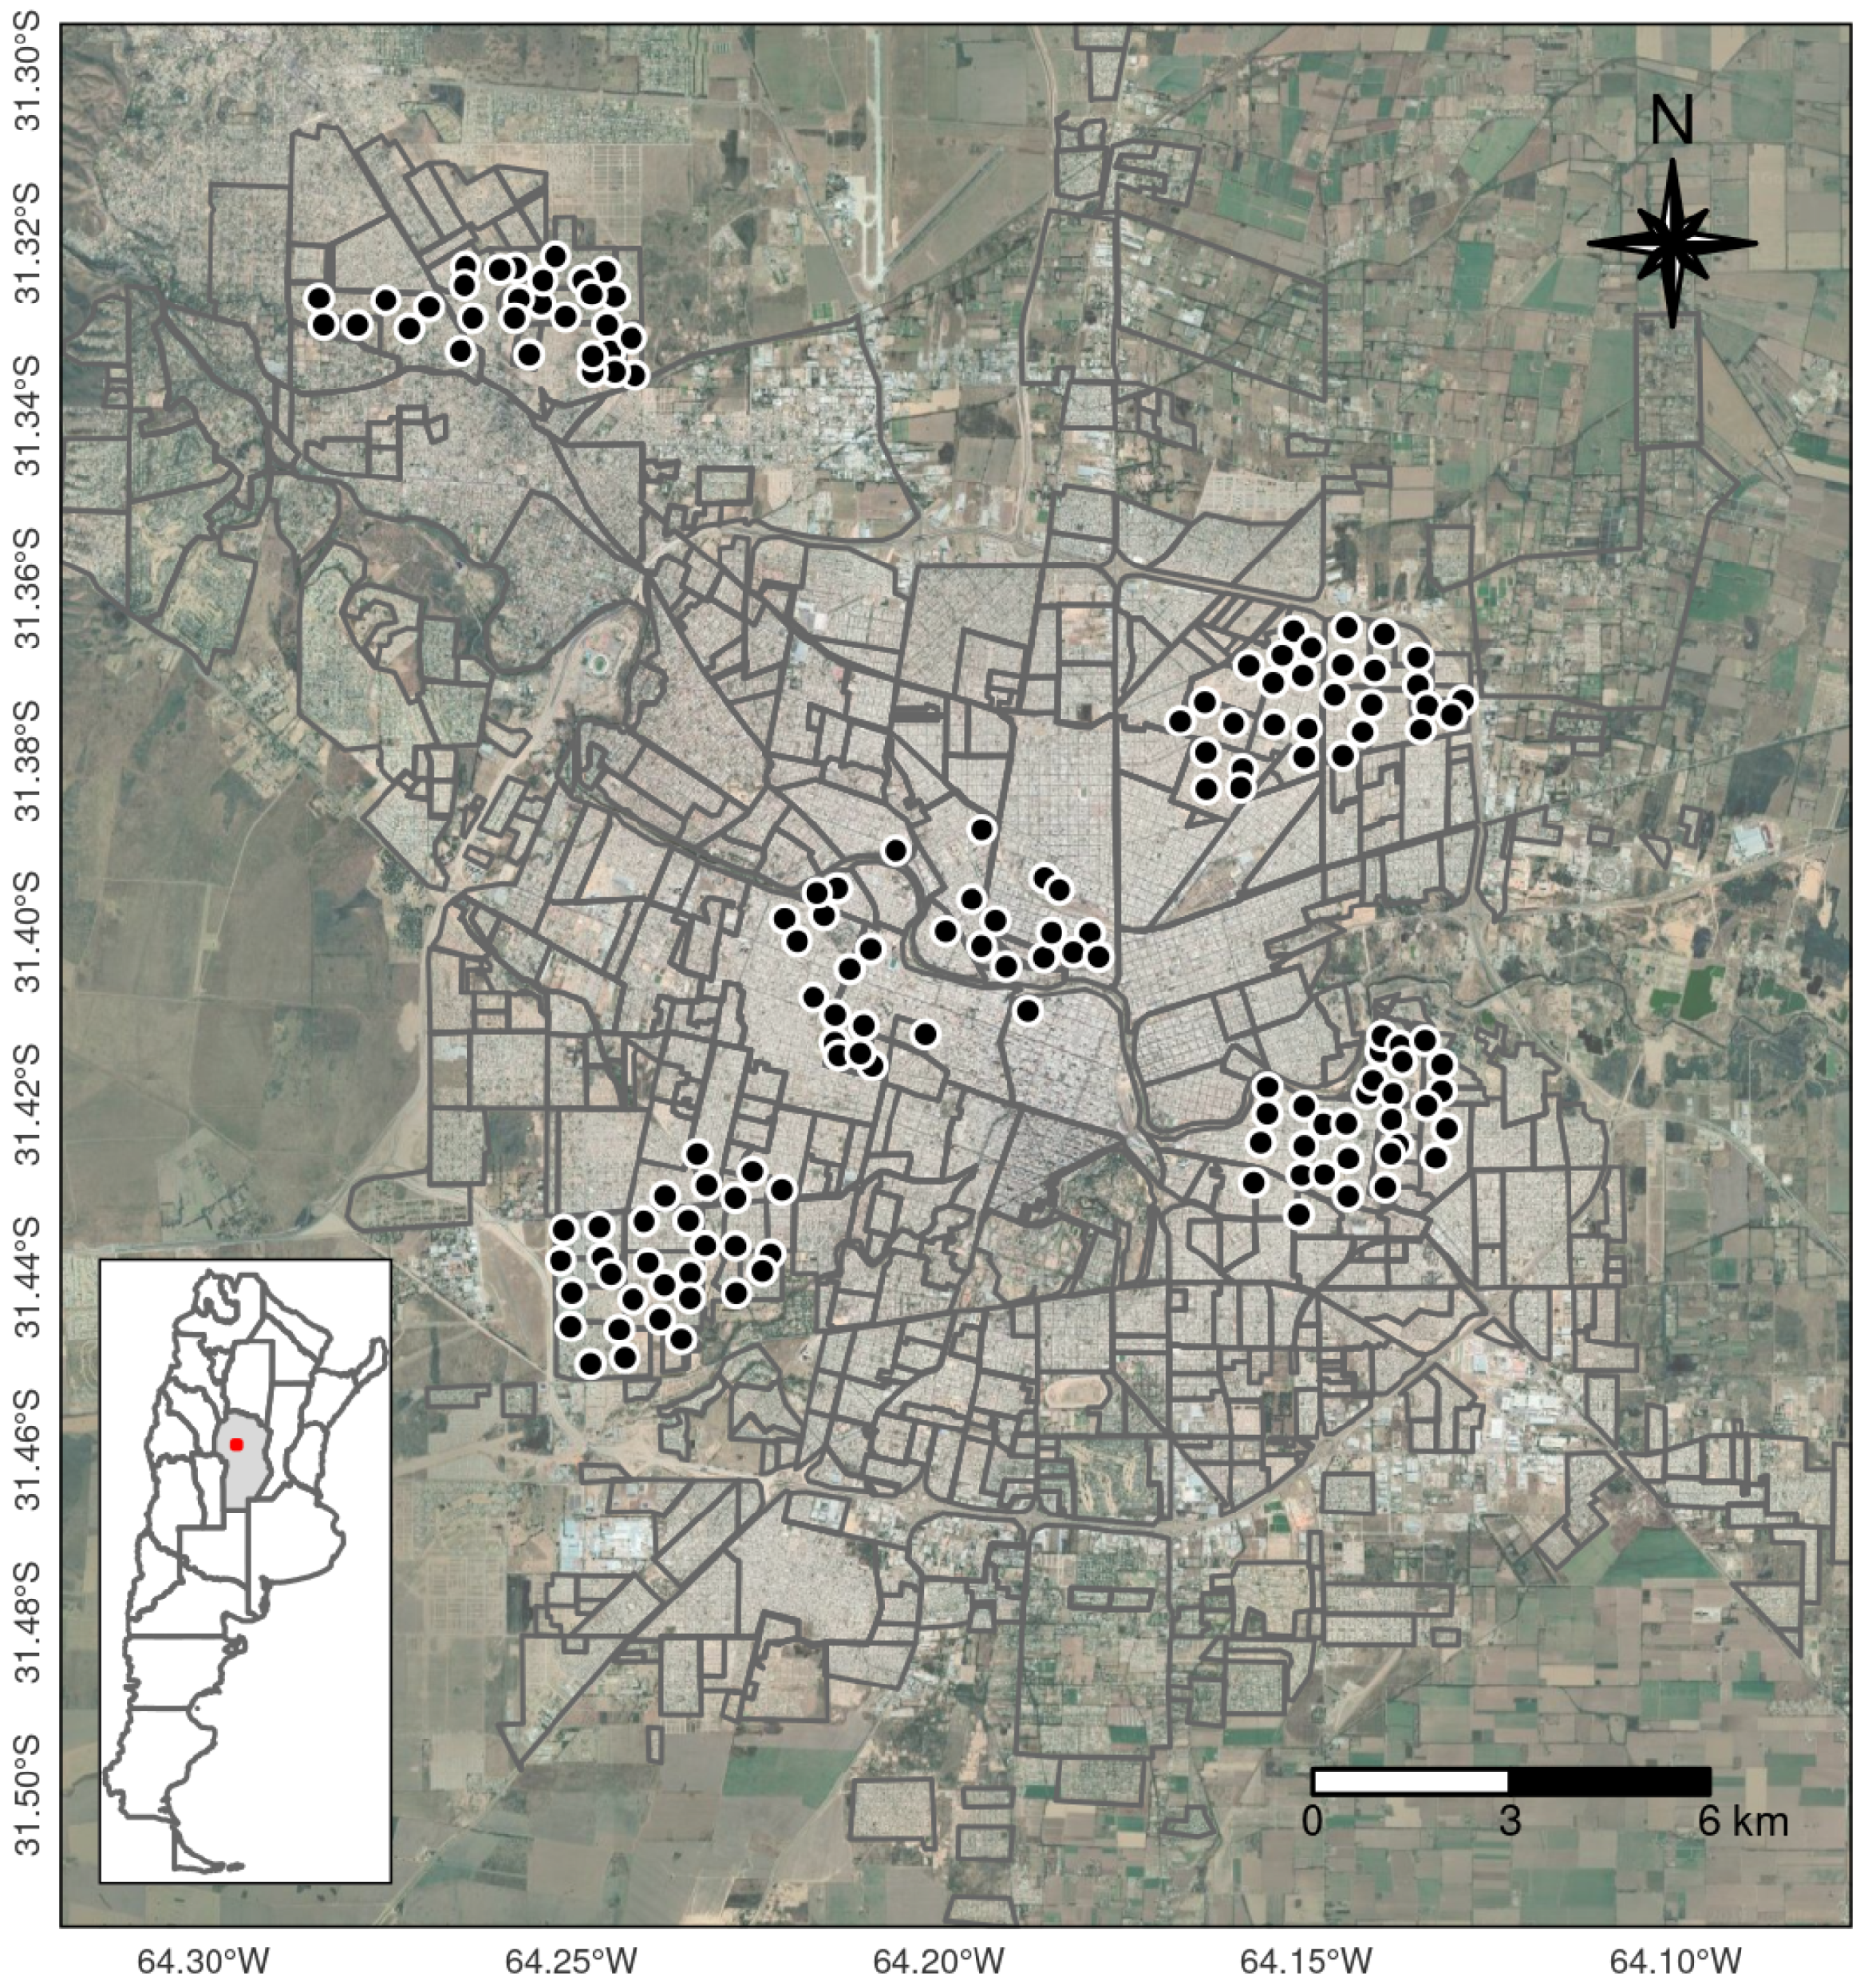 Insects | Free Full-Text | Spatial Distribution of Aedes aegypti  Oviposition Temporal Patterns and Their Relationship with Environment and  Dengue Incidence